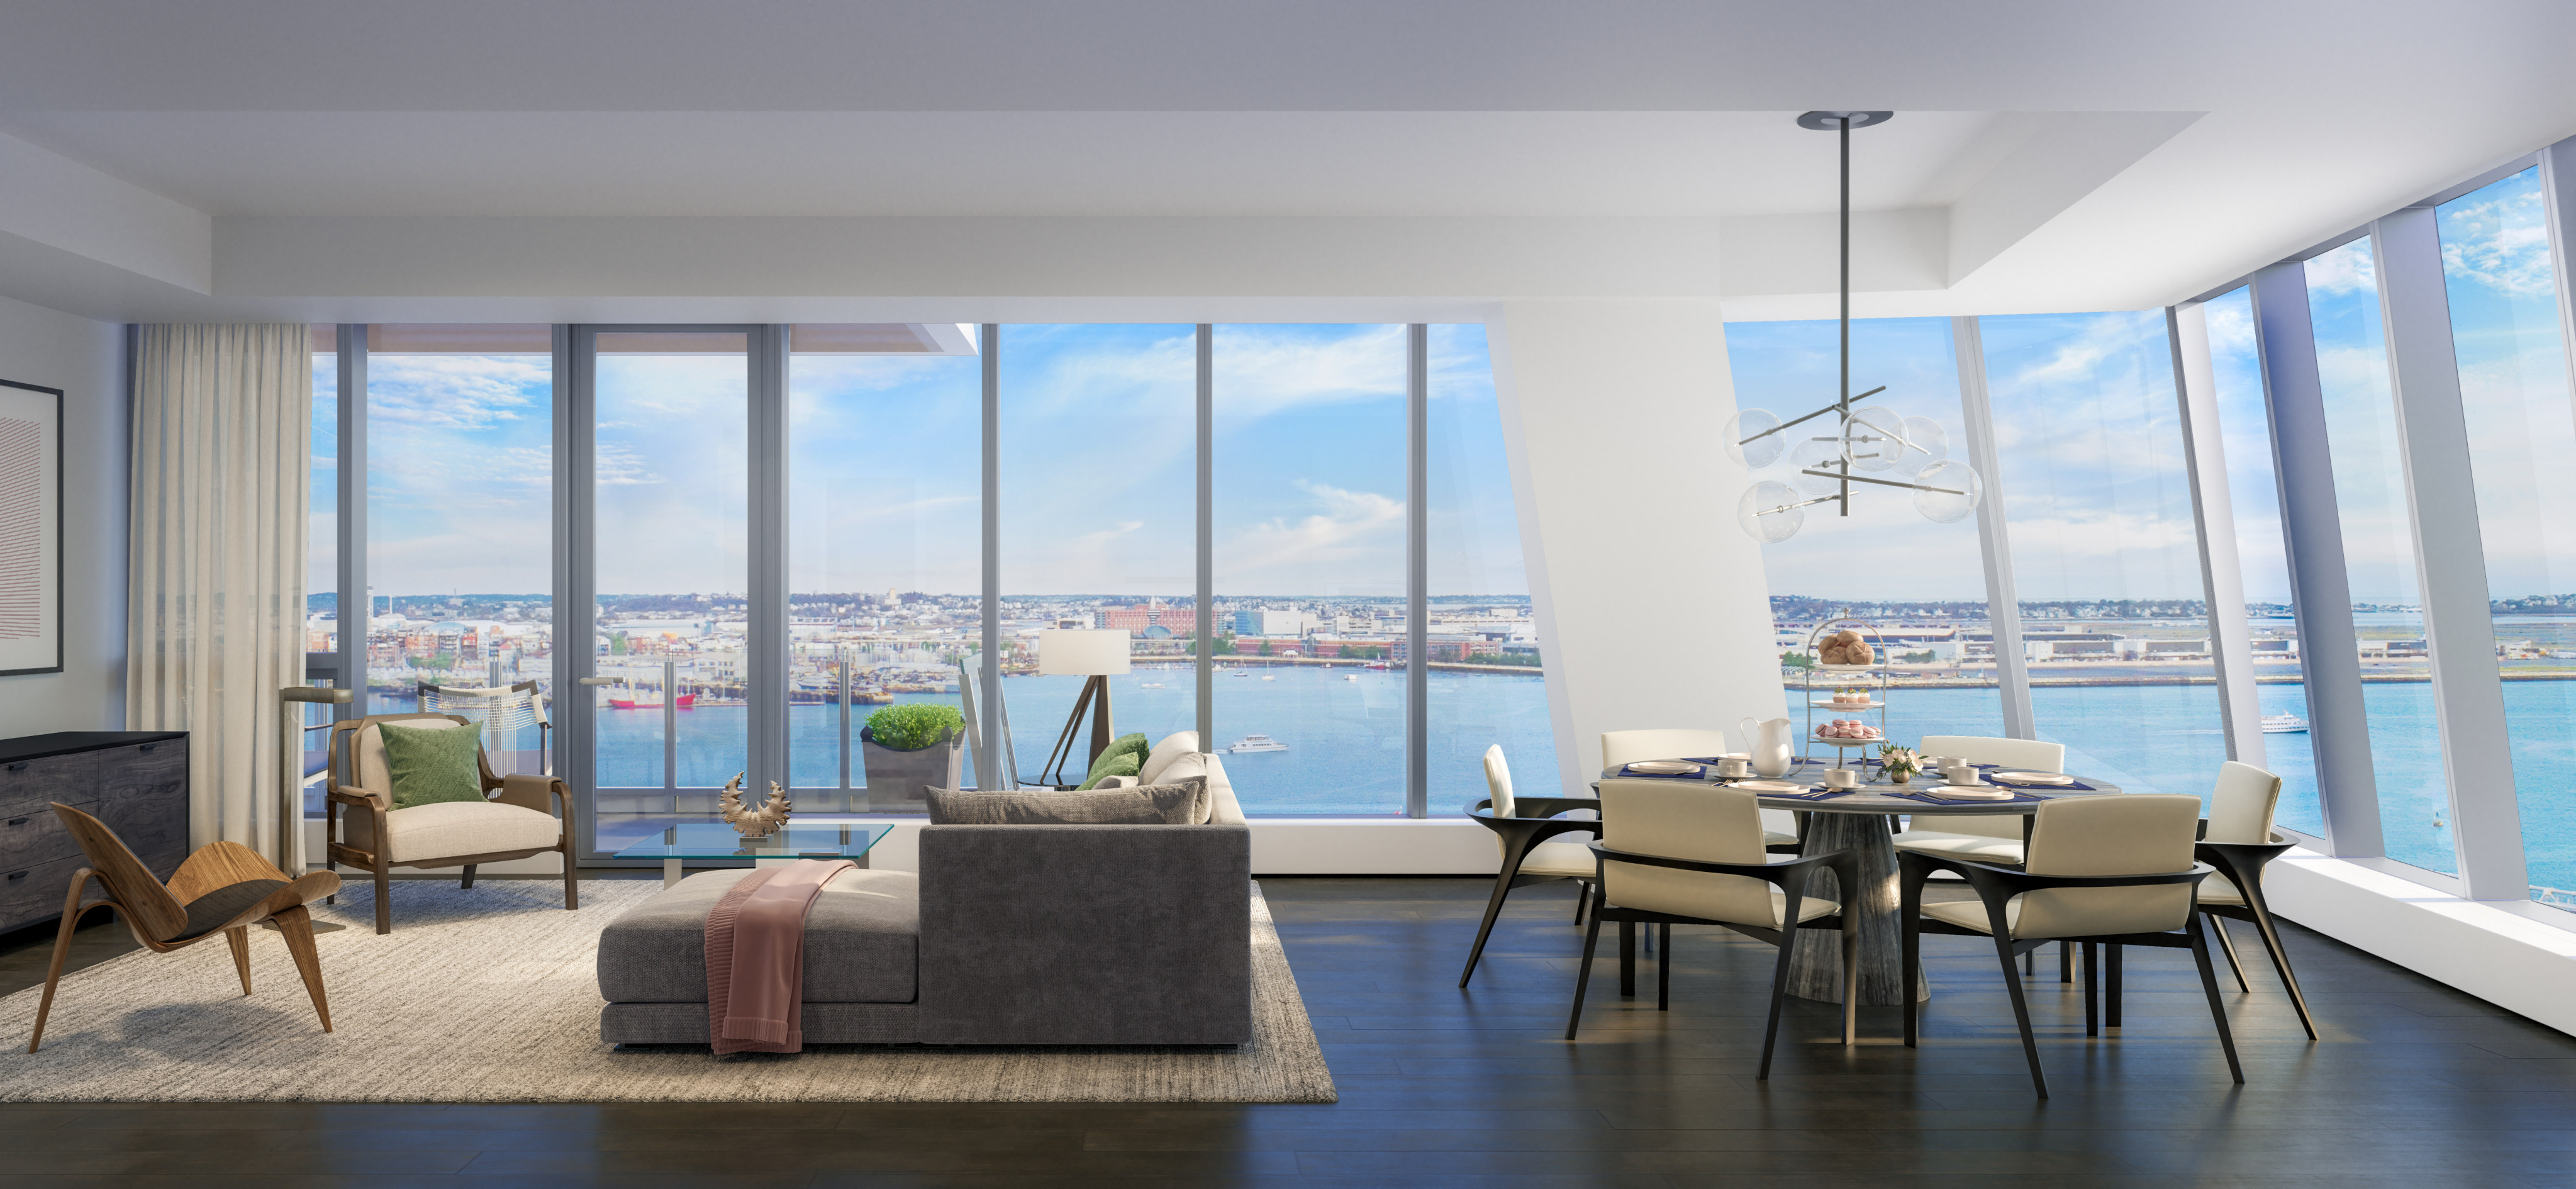 The St. Regis Residences, Boston, set for completion later this year, are a fine example of a worldwide trend for branded residences. Photo: Handout